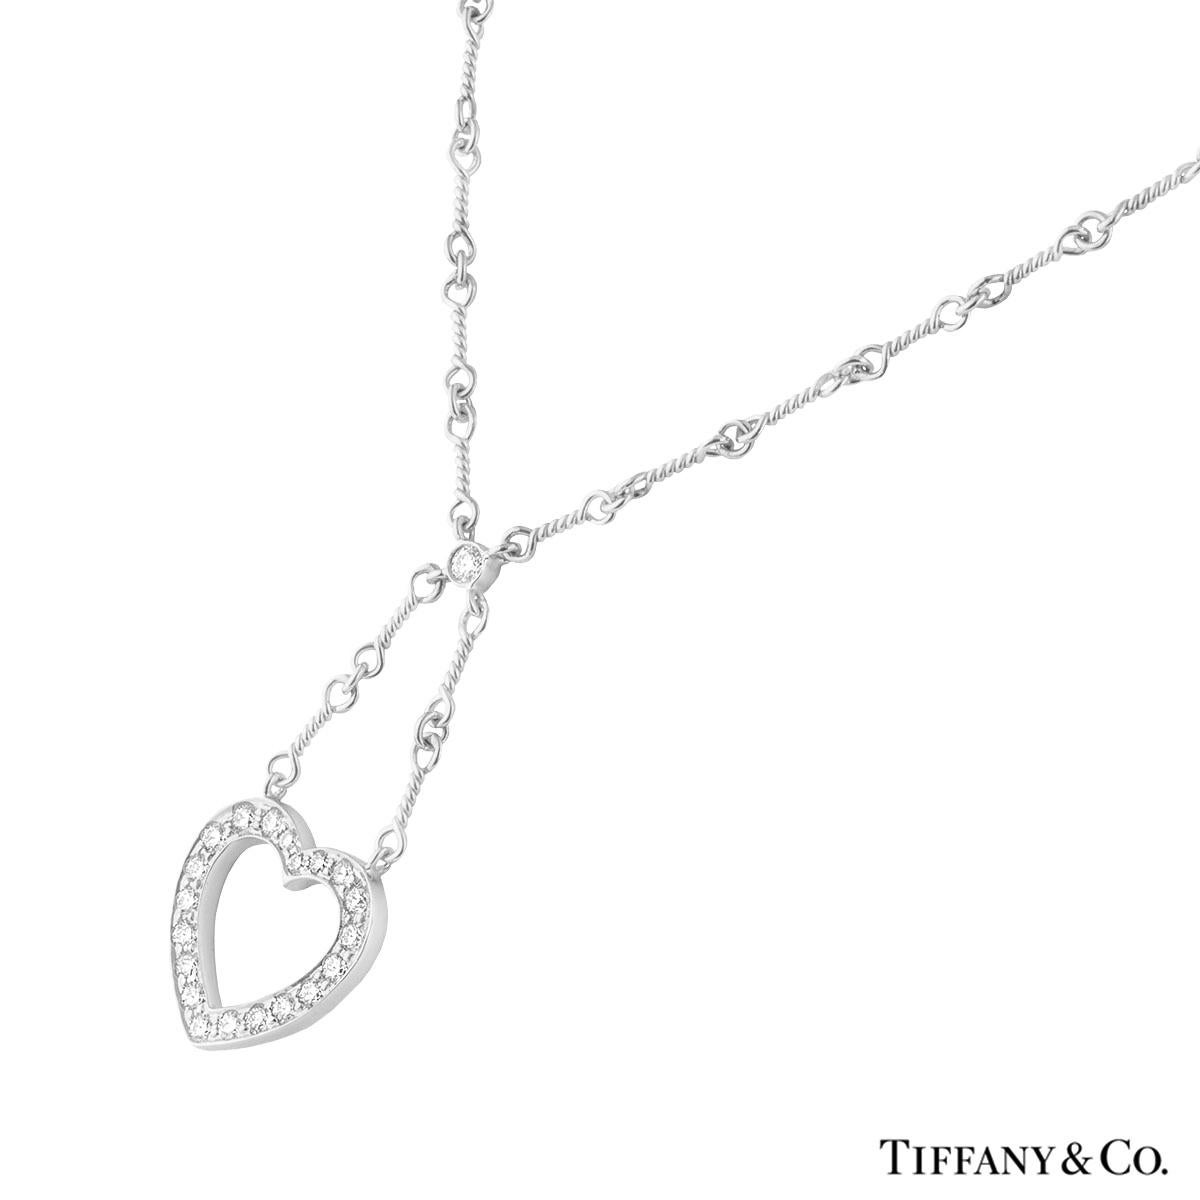 An elegant diamond necklace in platinum by Tiffany & Co. The necklace is set with a single round brilliant cut diamond leading on to an open work heart motif, pave set with 20 round brilliant cut diamonds totalling approximately 0.65ct, G colour and